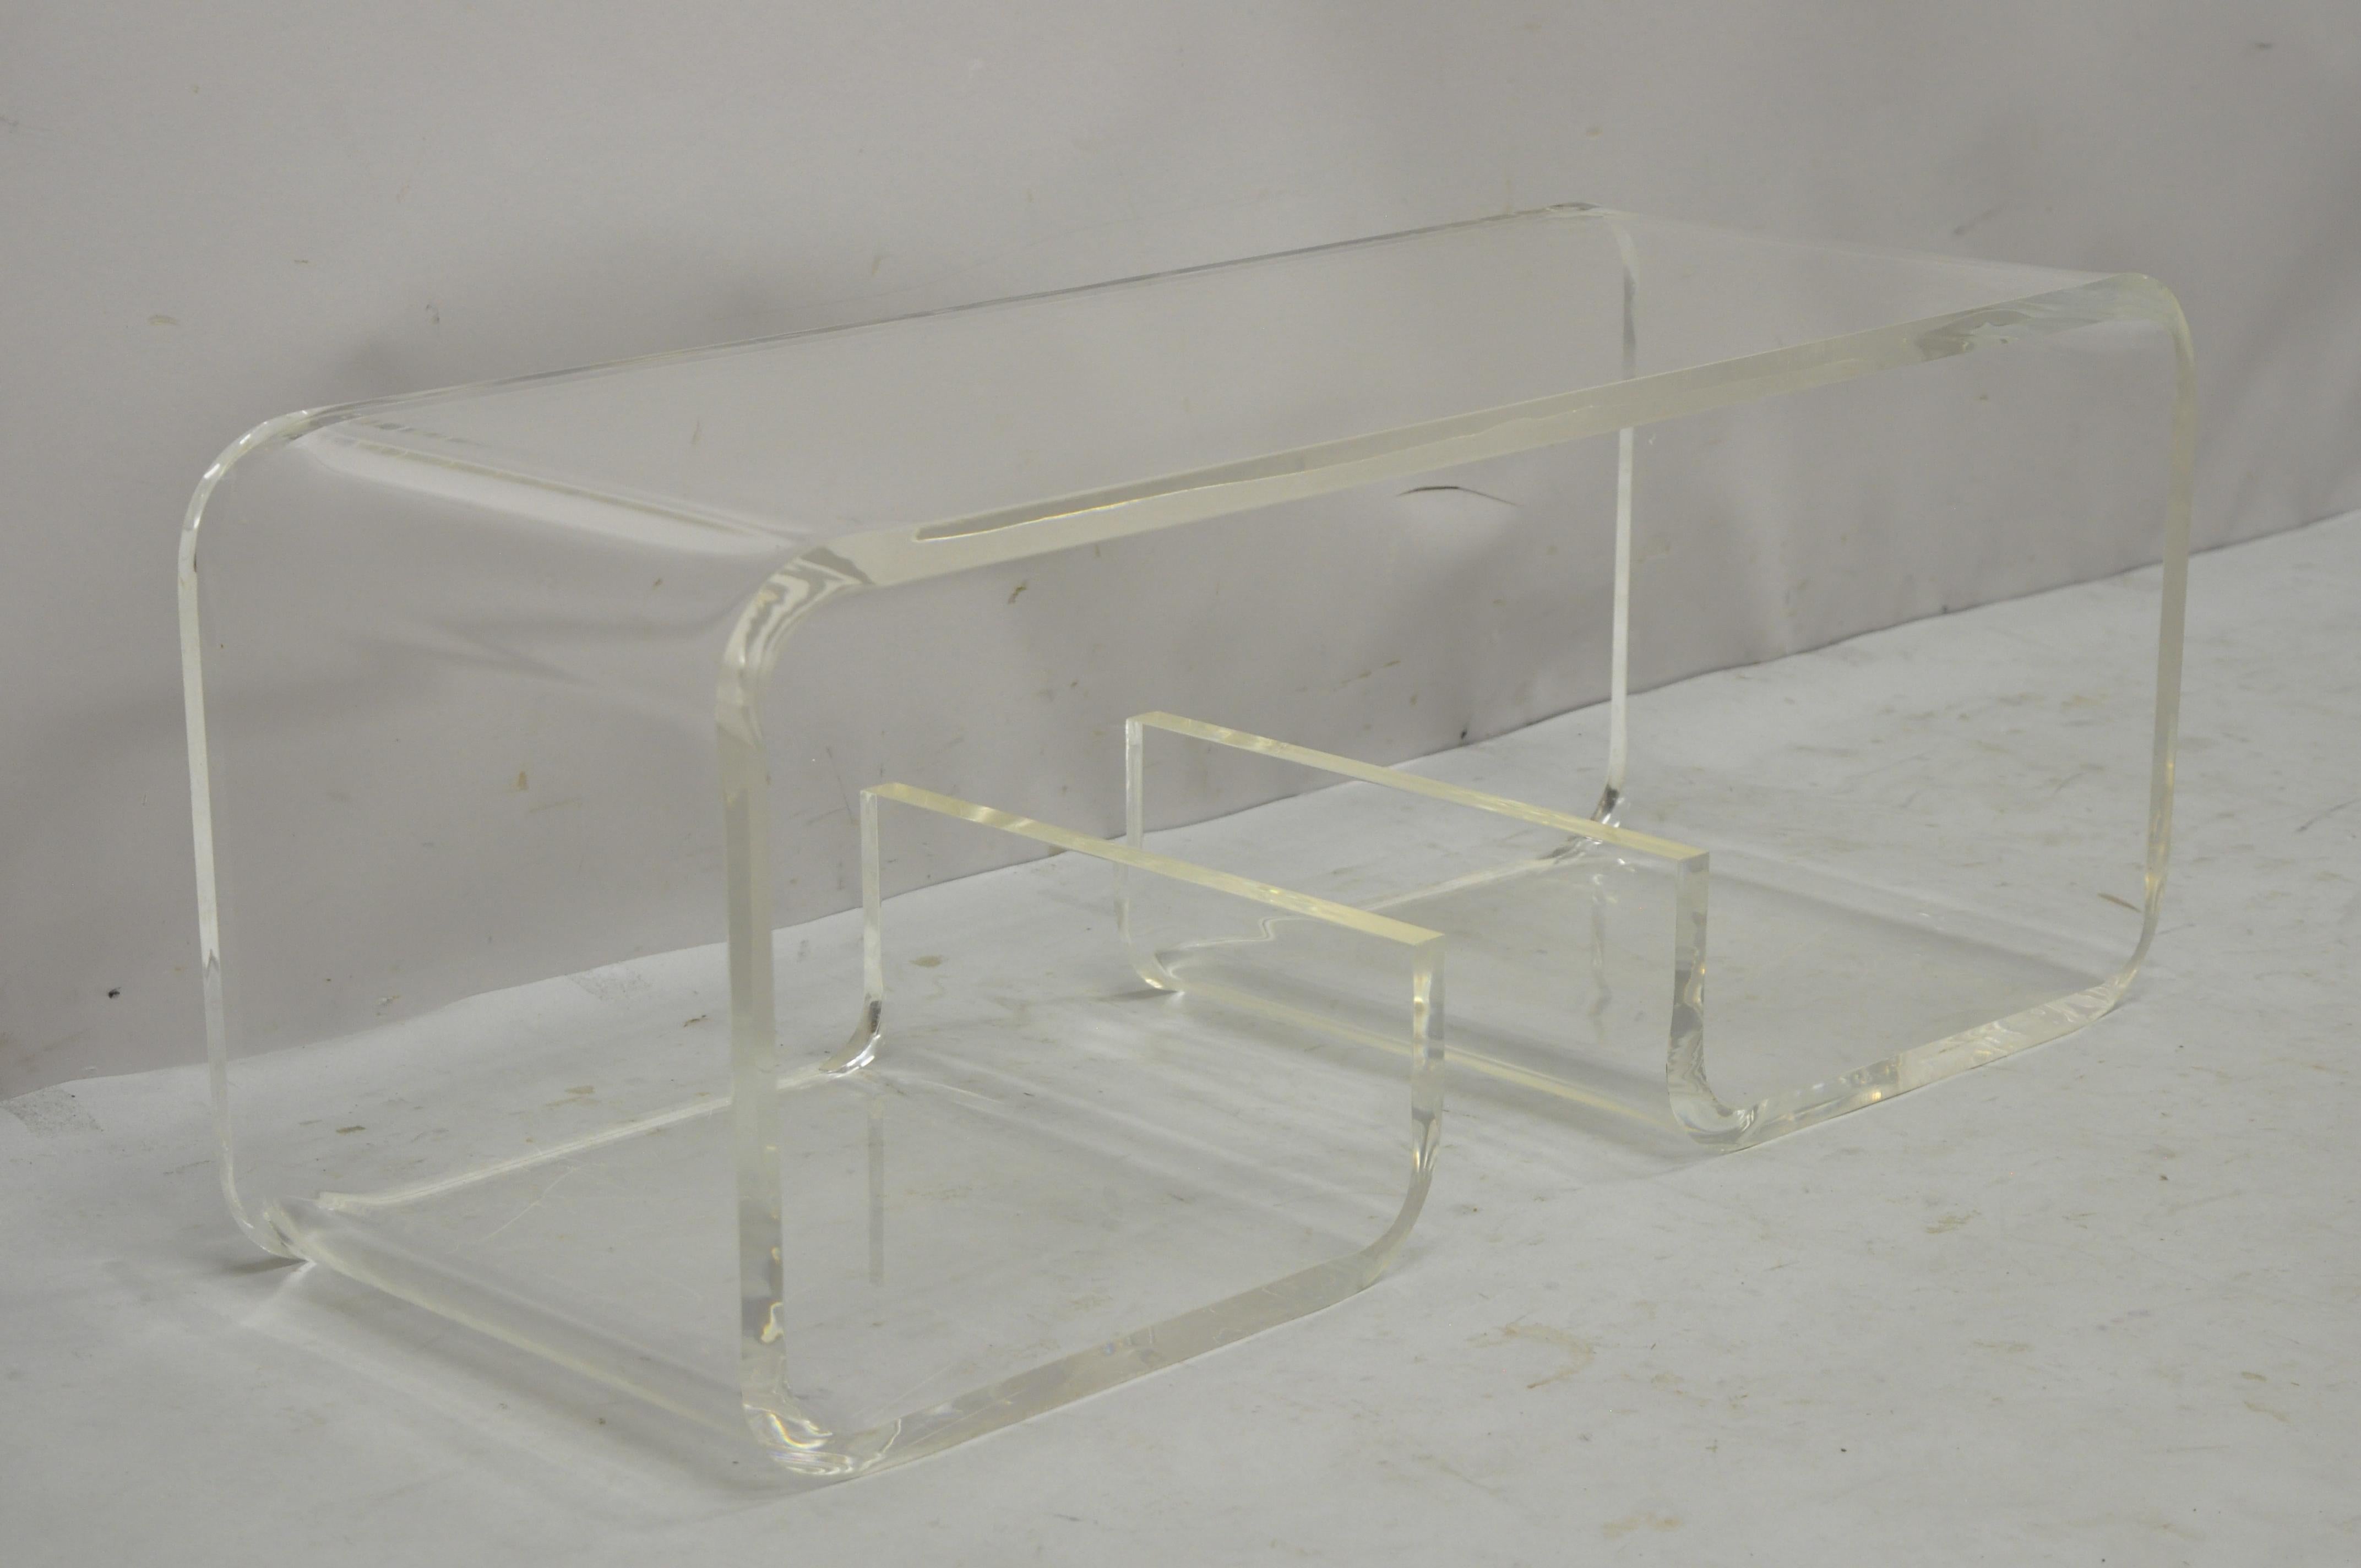 Vintage Mid-Century Modern clear lucite scroll coffee table after Charles Hollis Jones. Item features thick heavy clear lucite construction, scroll design, clean modernist lines, quality American craftsmanship, sleek sculptural form. Circa 1970s.